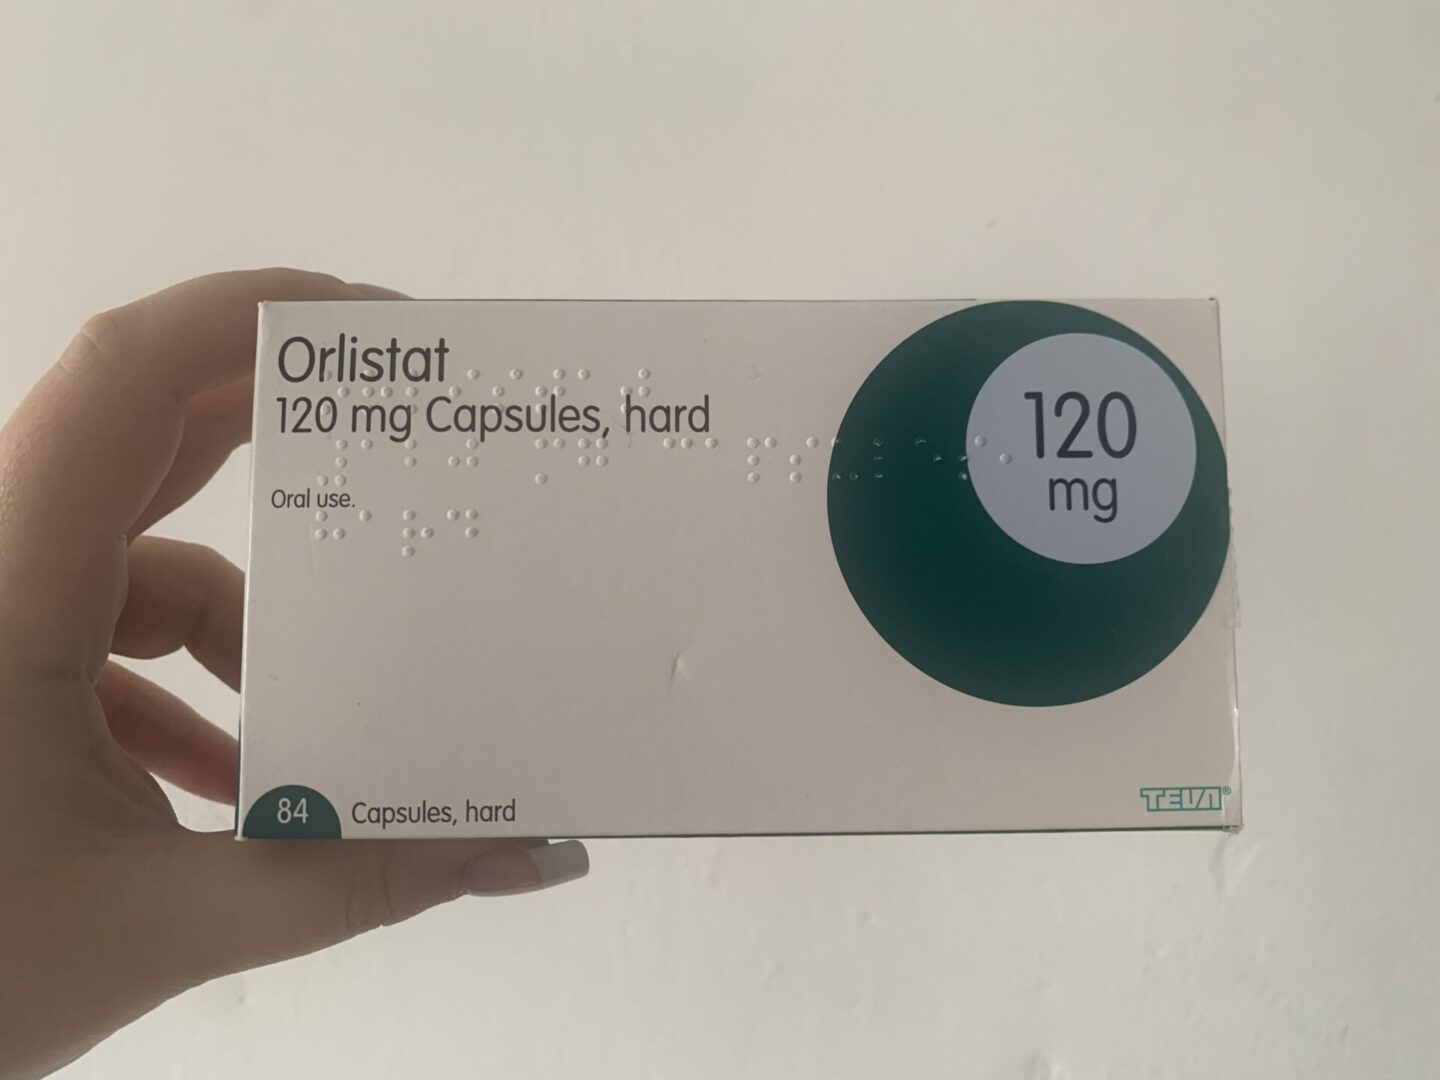 What is Orlistat and why am I taking it?